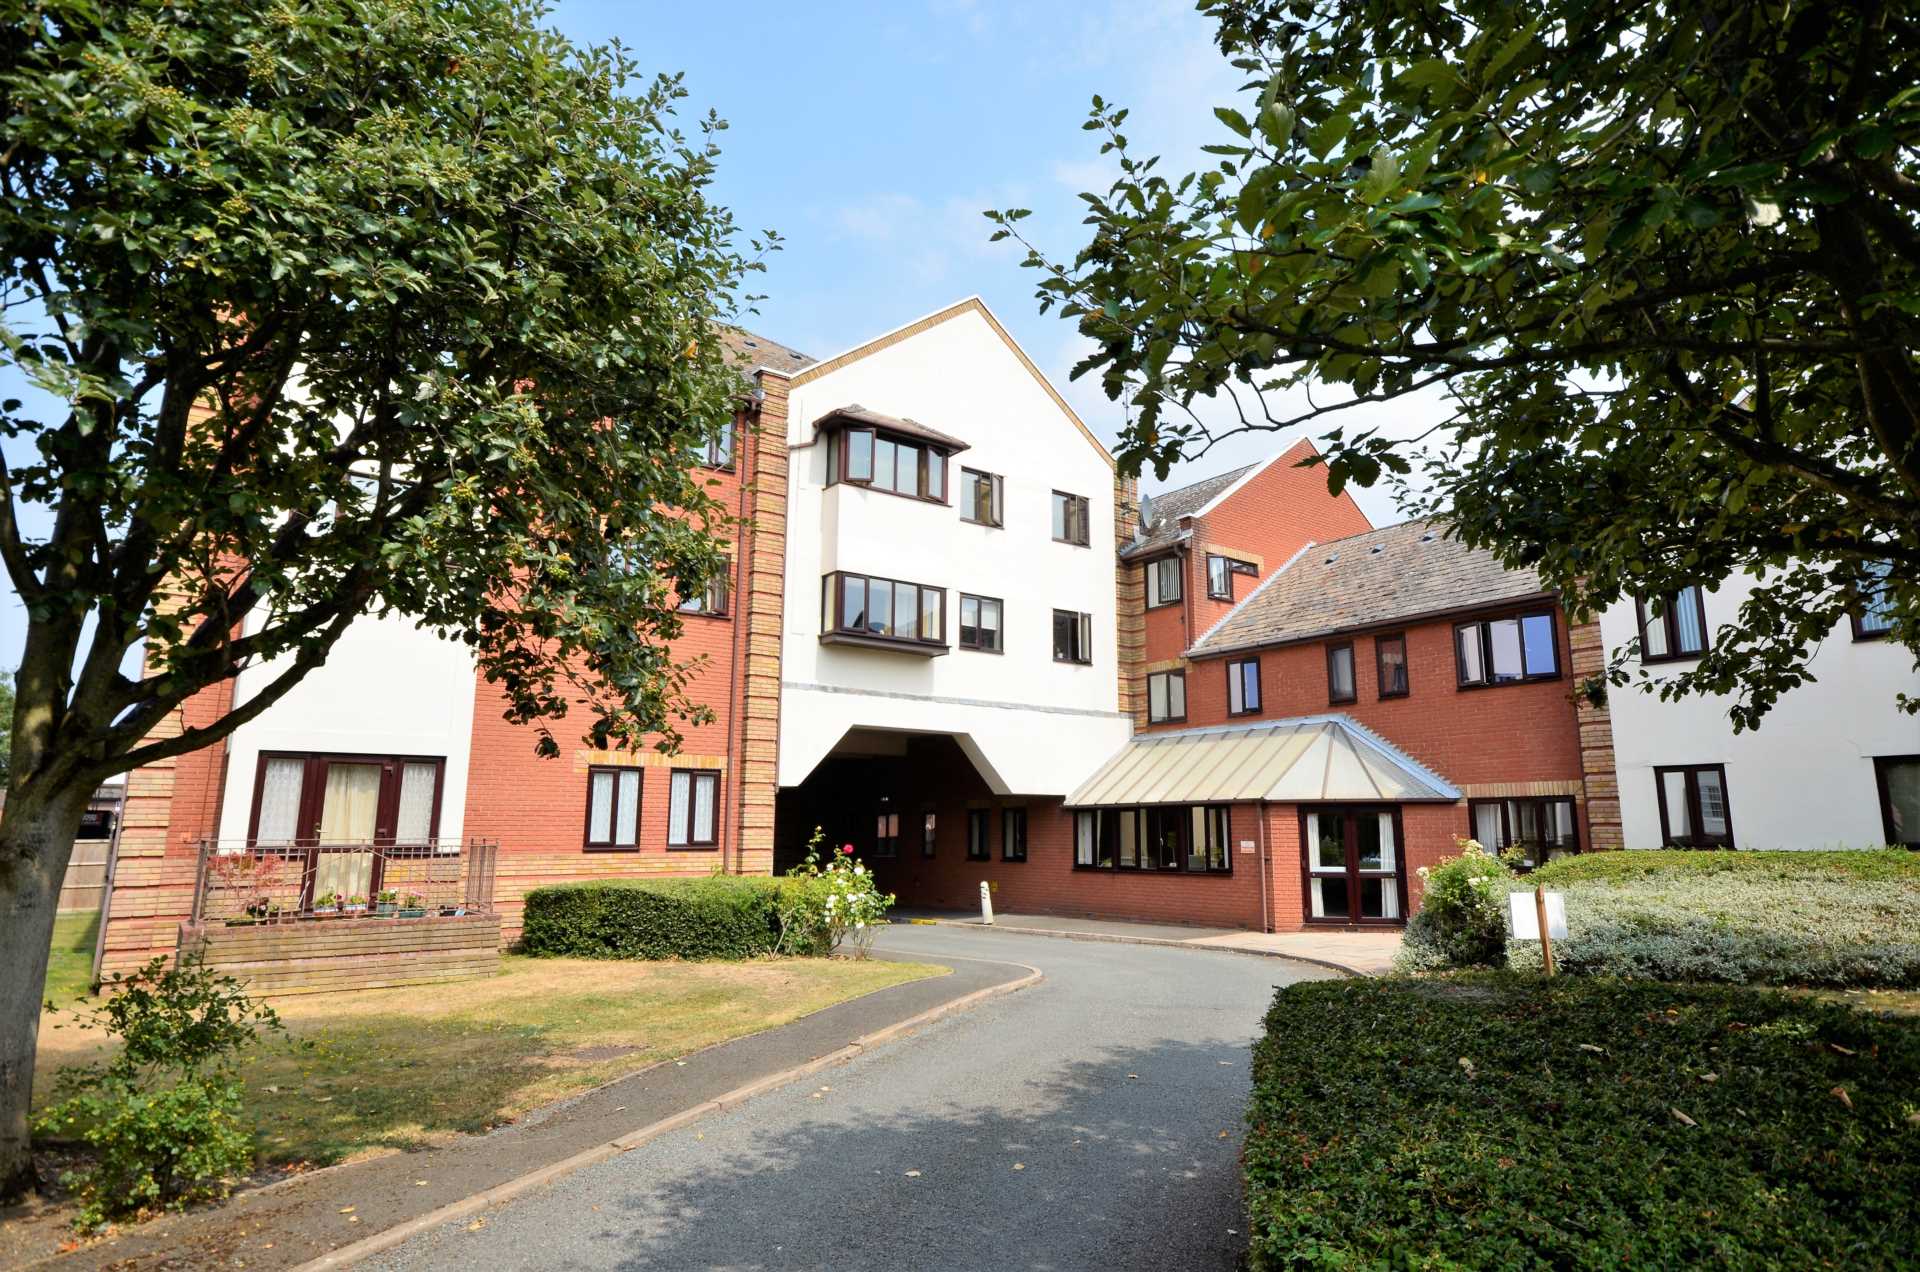 Albion Court, Billericay, Image 1